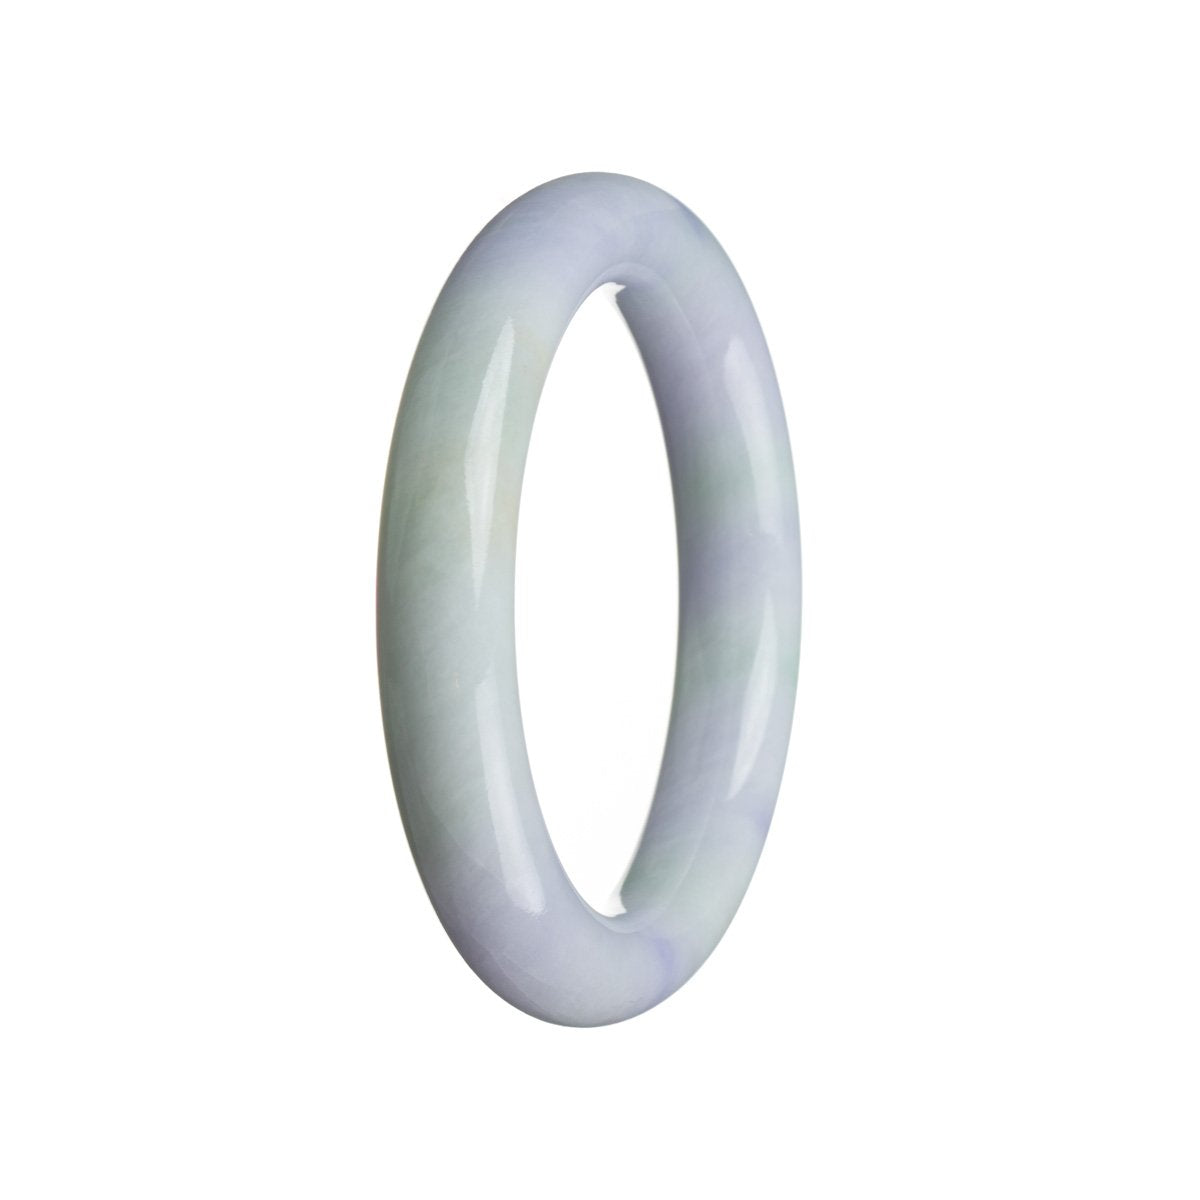 An elegant round lavender jadeite bangle, crafted with genuine Grade A candy jade. Sized at 52mm, this bangle from MAYS GEMS is a stunning accessory.